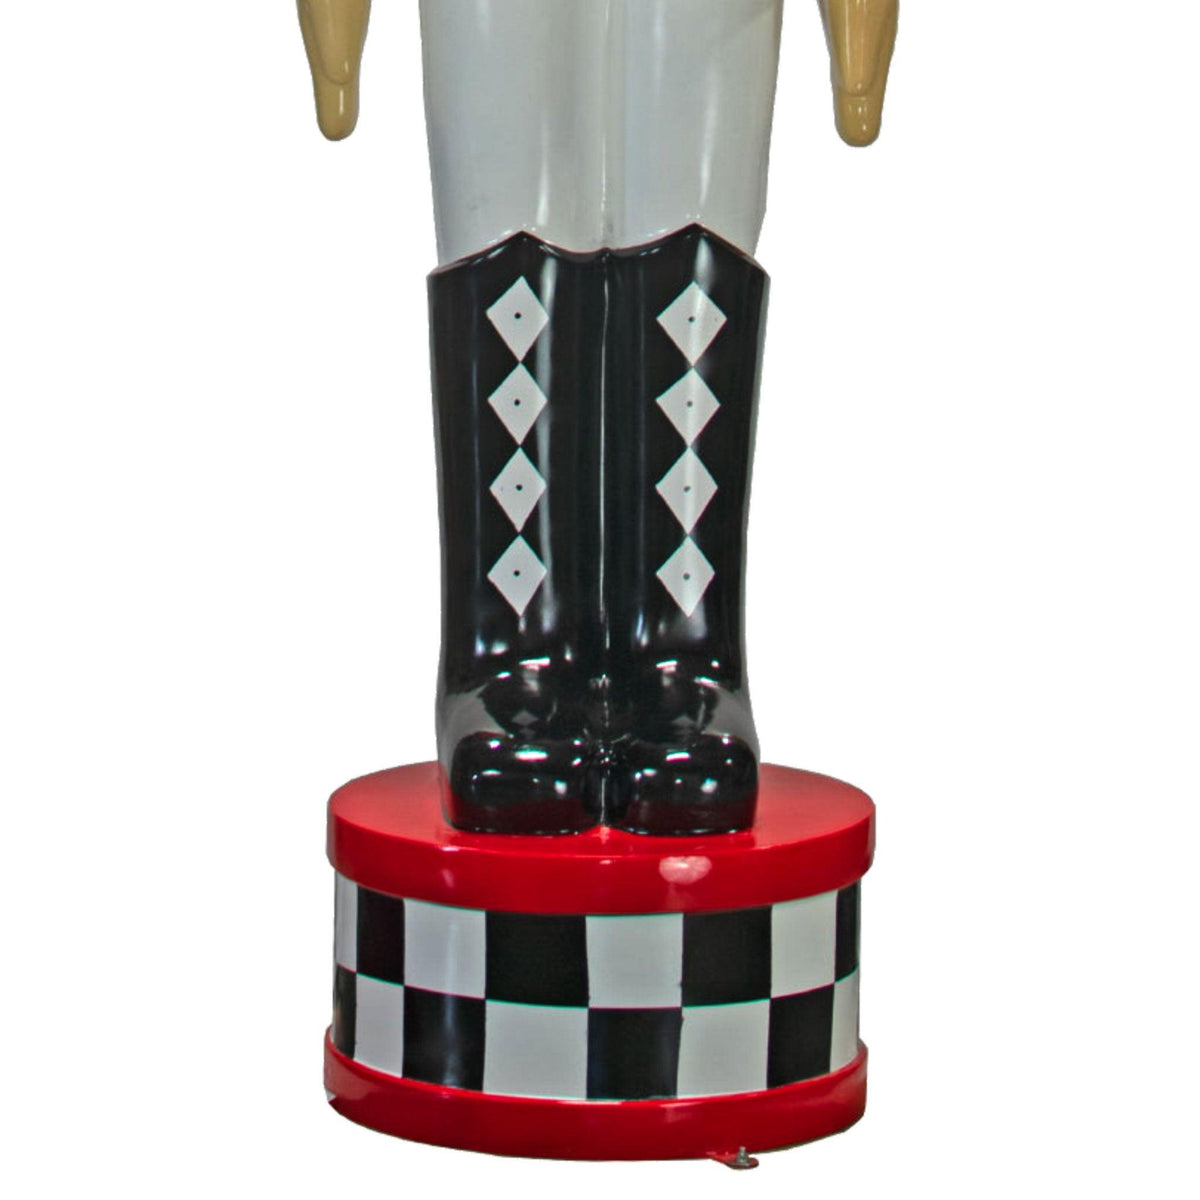 Lee Display's Brand New 12FT Red and White Checkered Fiberglass Nutcrackers on Sale and Available for Local Installation at leedisplay.com